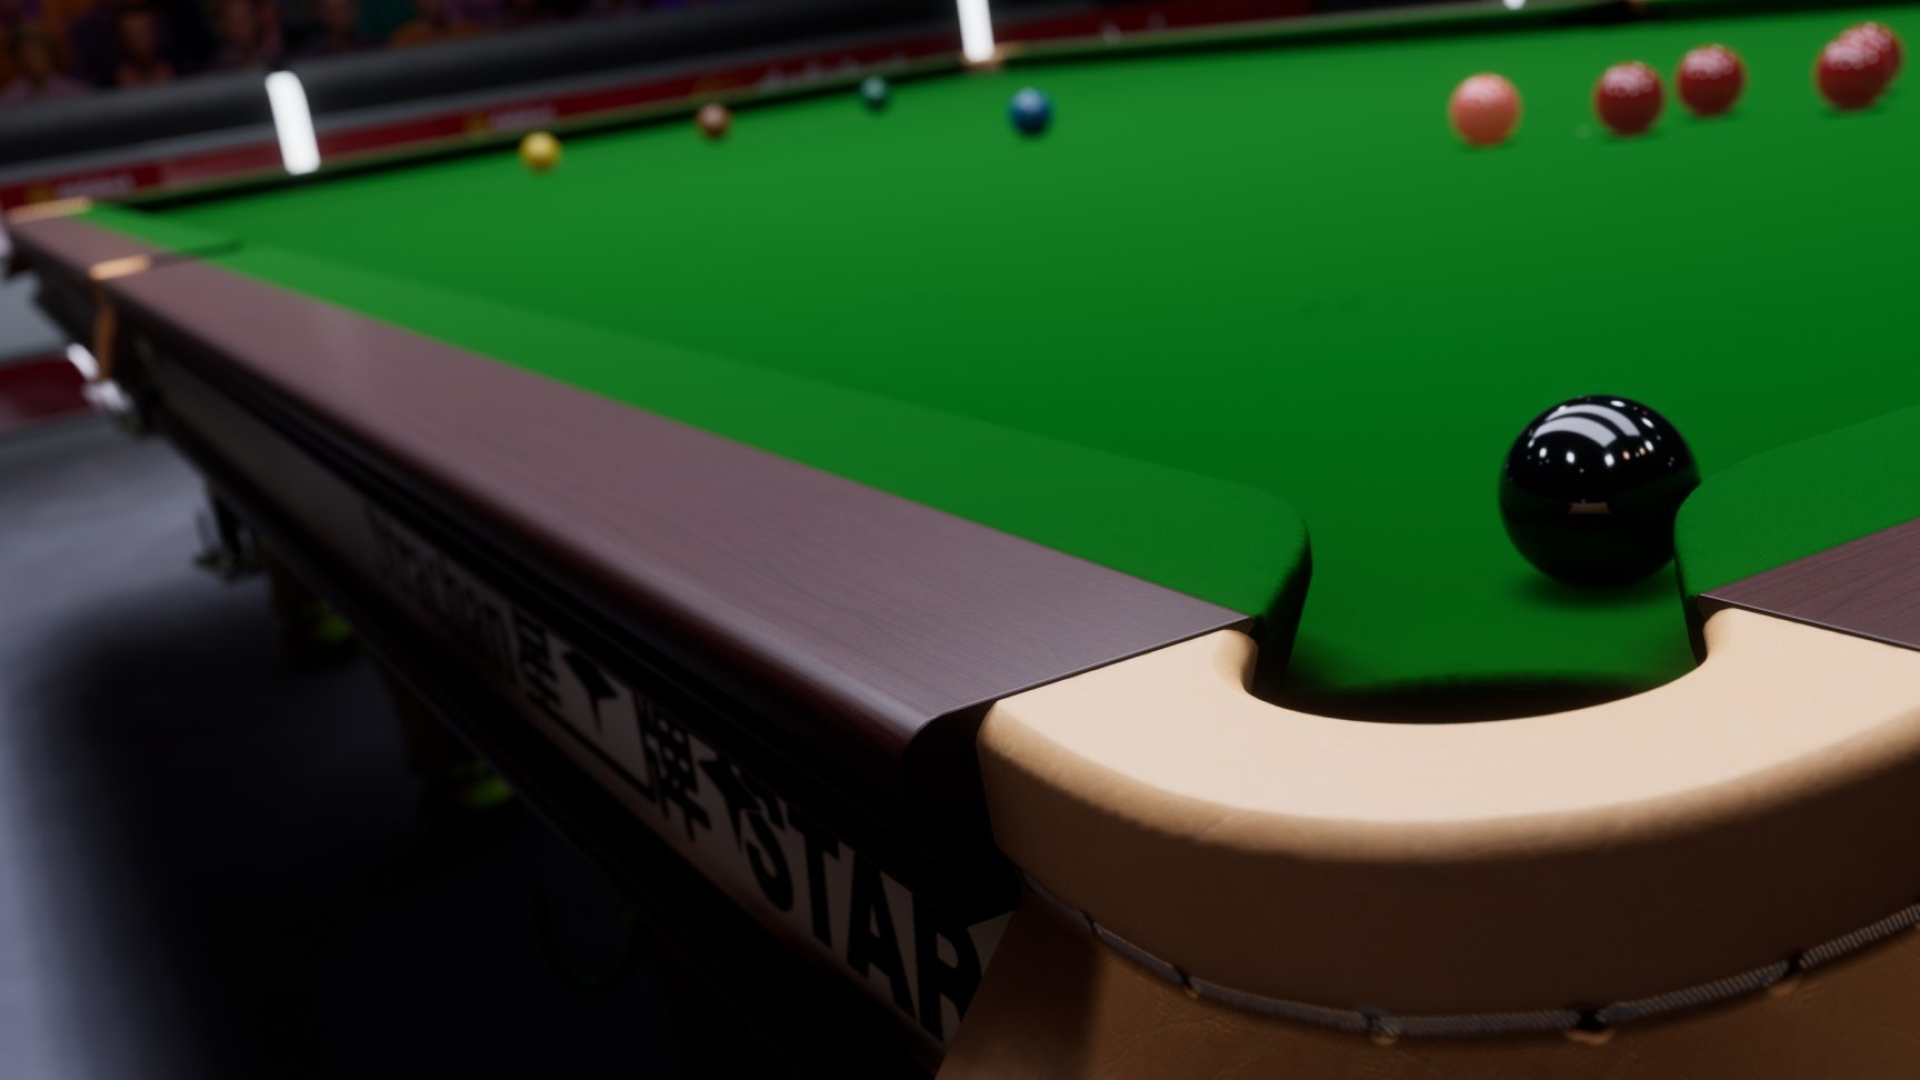 Snooker simulation, Erstes videomaterial, Snooker 19, Exciting gameplay, 1920x1080 Full HD Desktop